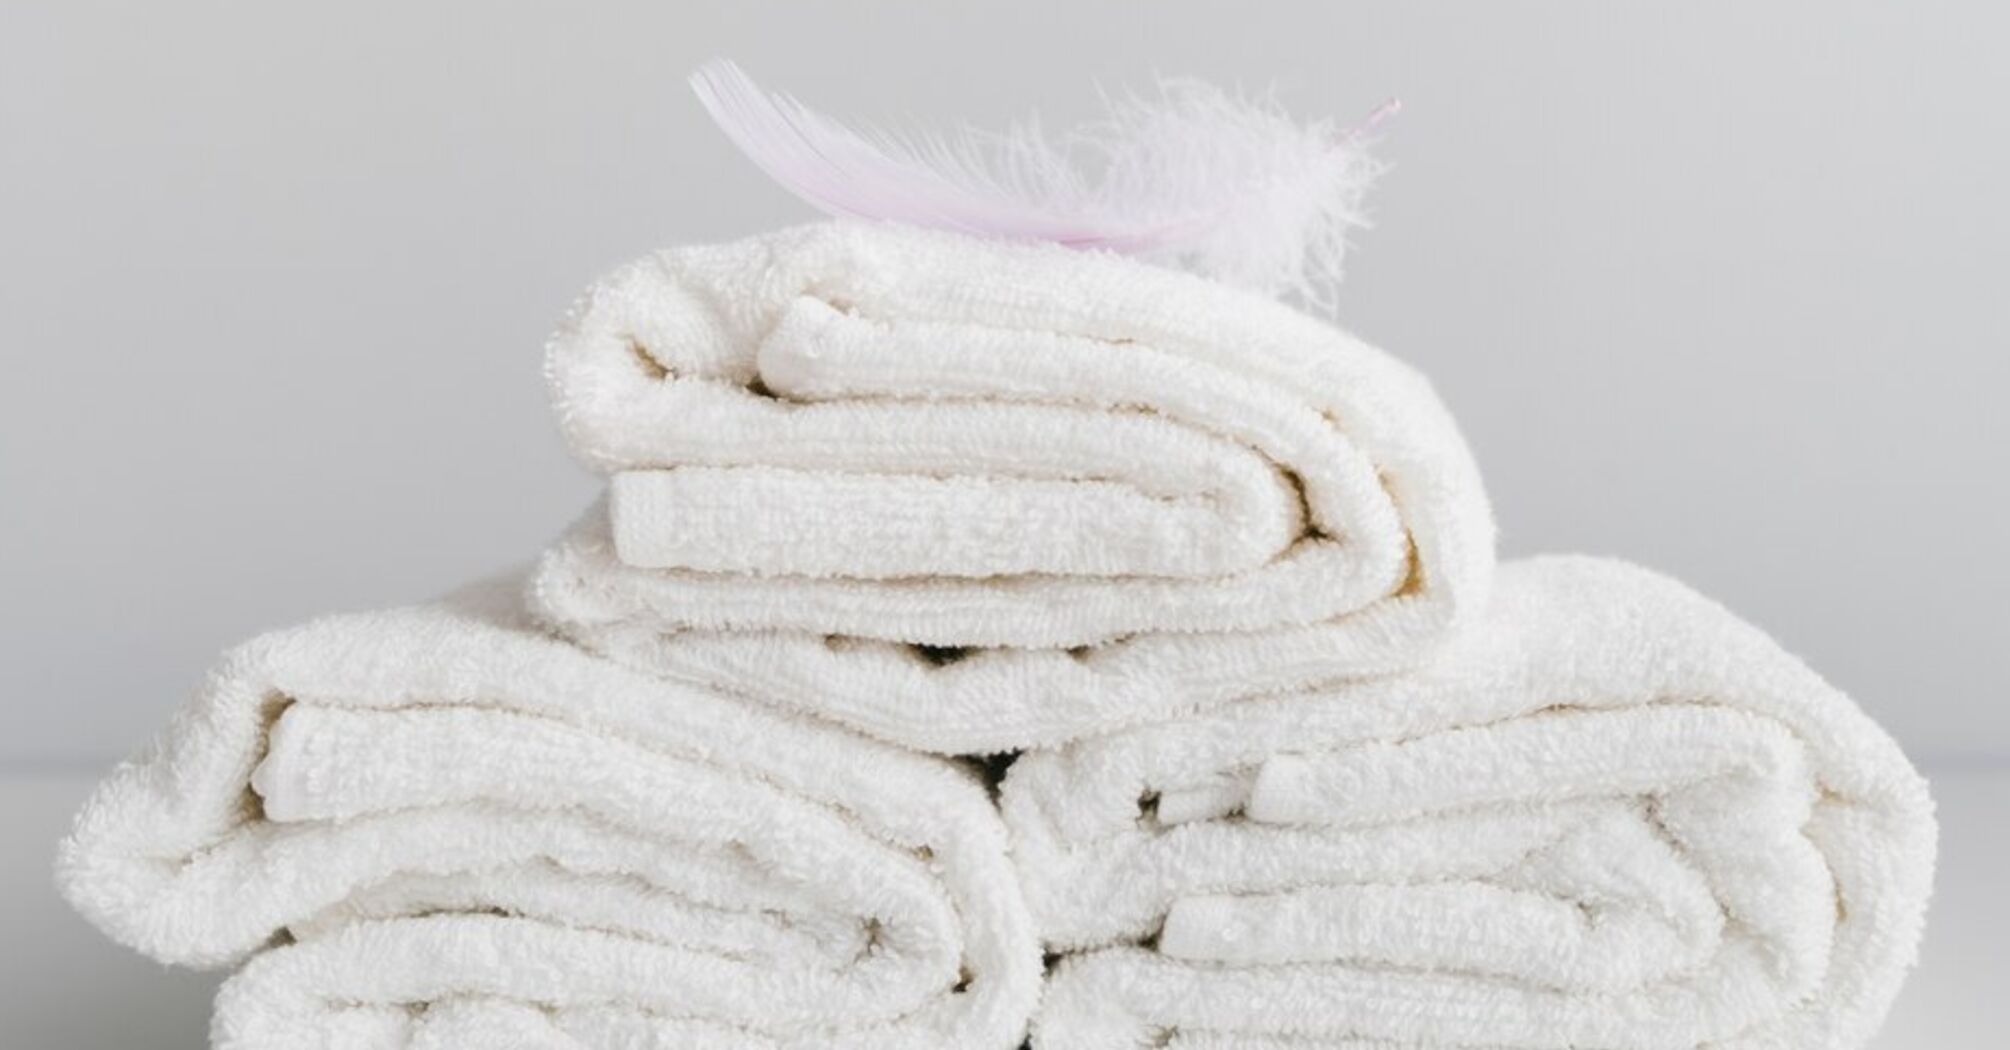 Secrets of freshness: how to get rid of unpleasant odors on towels once and for all